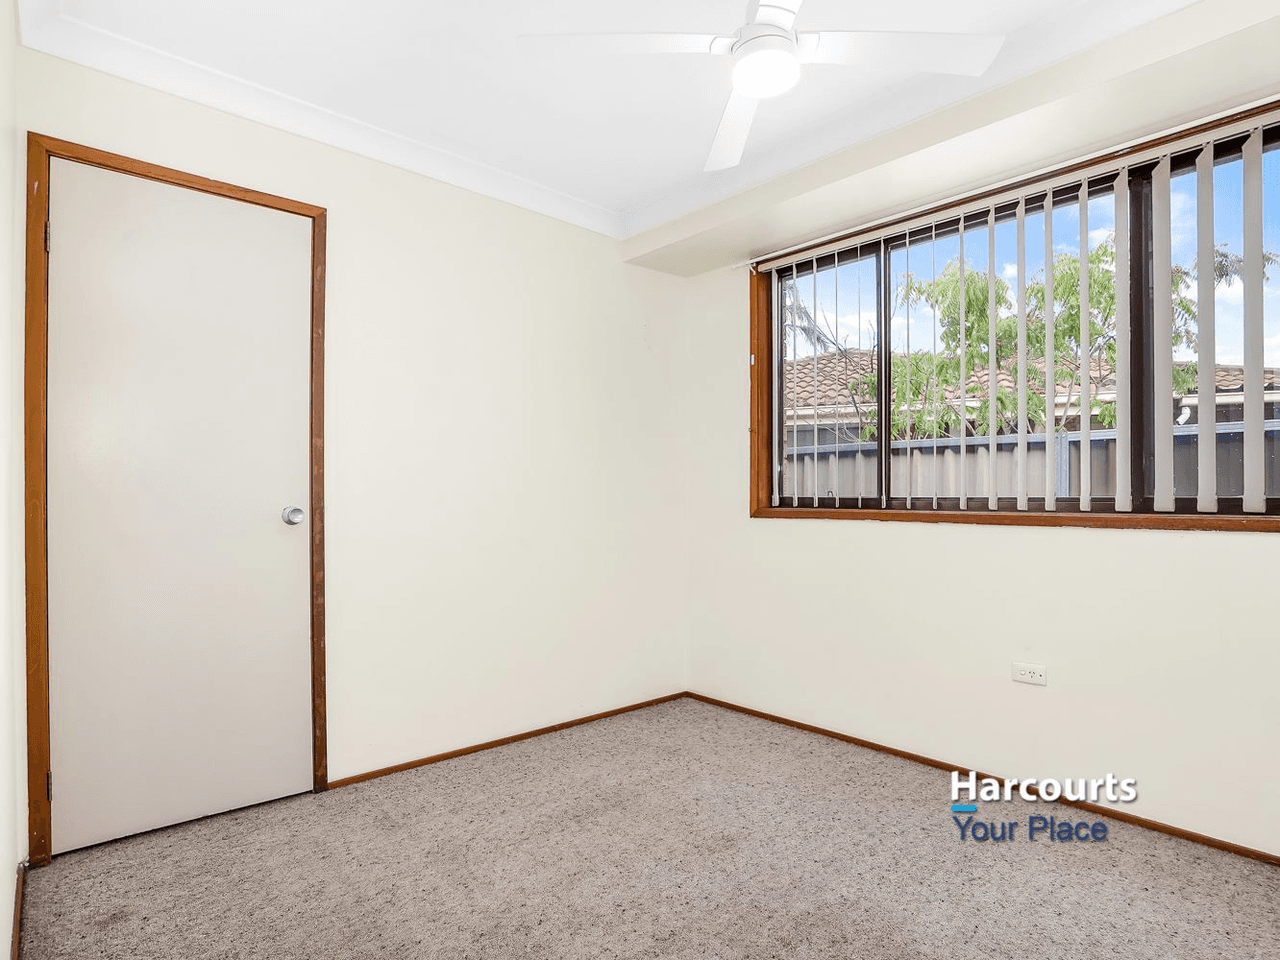 13 Augusta Place, St Clair, NSW 2759